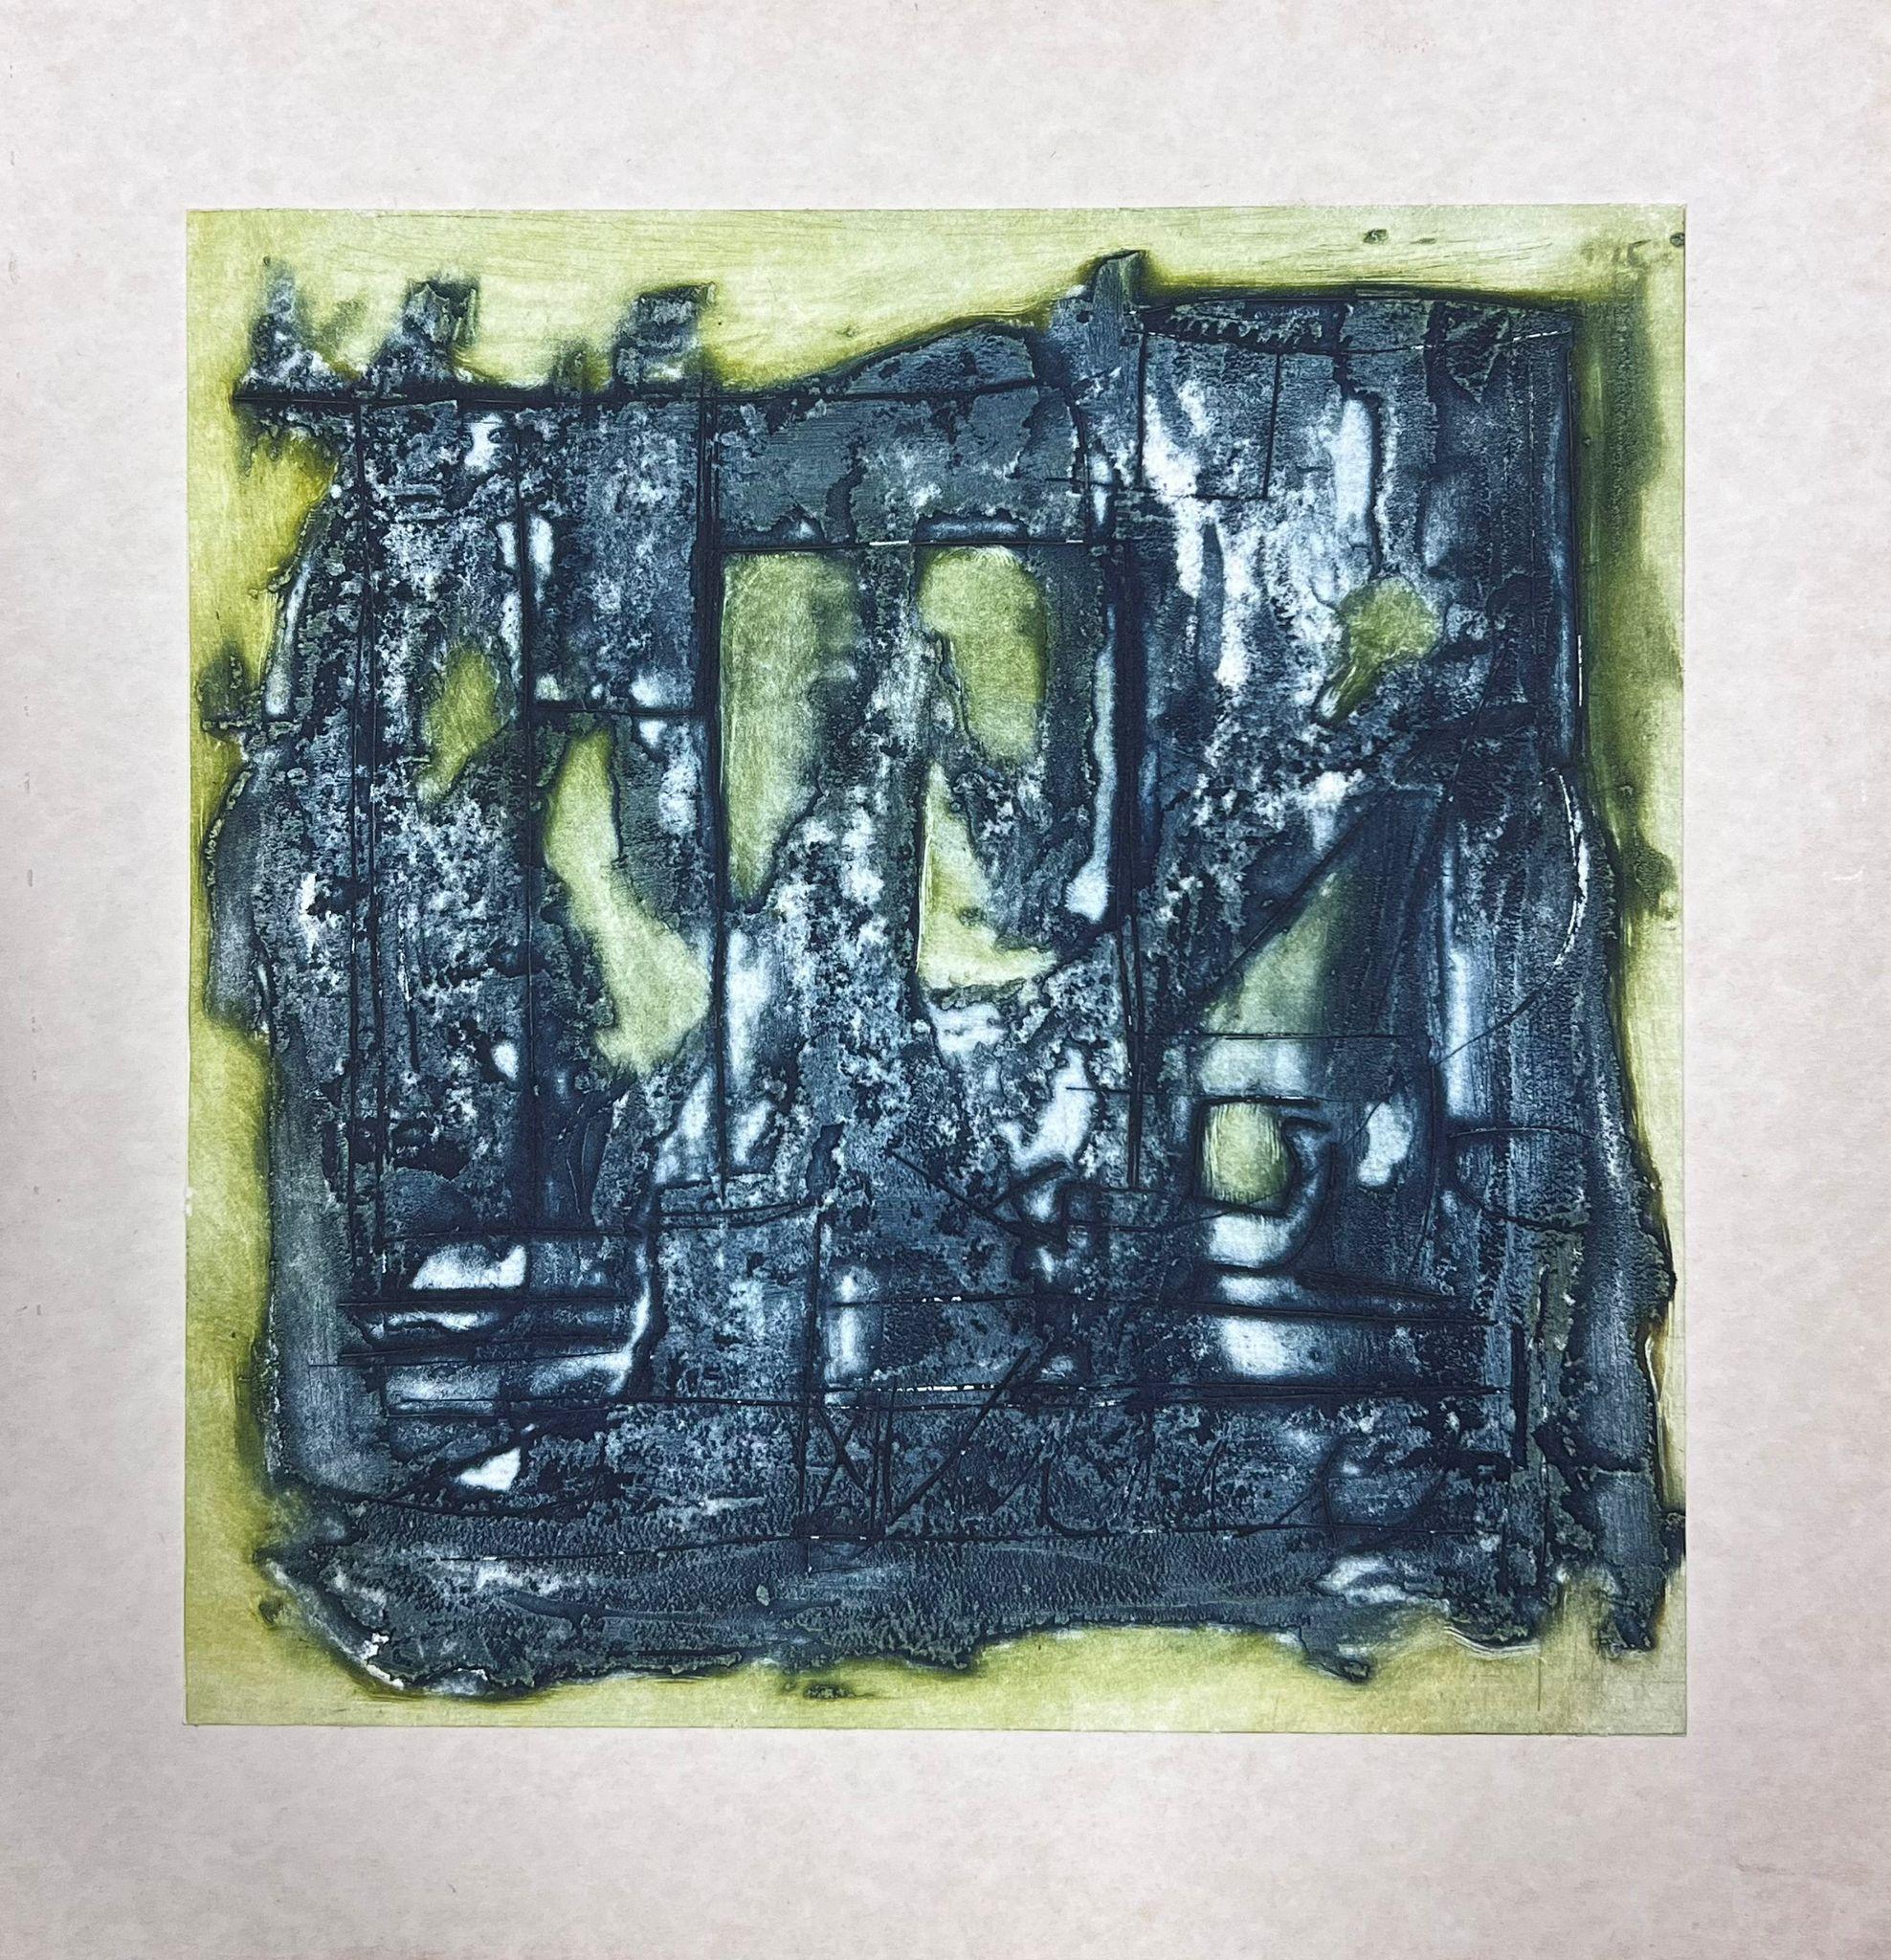 Abstract Expressionist Composition
by Jacques COULAIS (1955-2011) watercolour painting on artist paper stuck on board
unframed: 10 x 9.75 inches
condition: excellent
provenance: all the paintings we have for sale by this artist have come from the